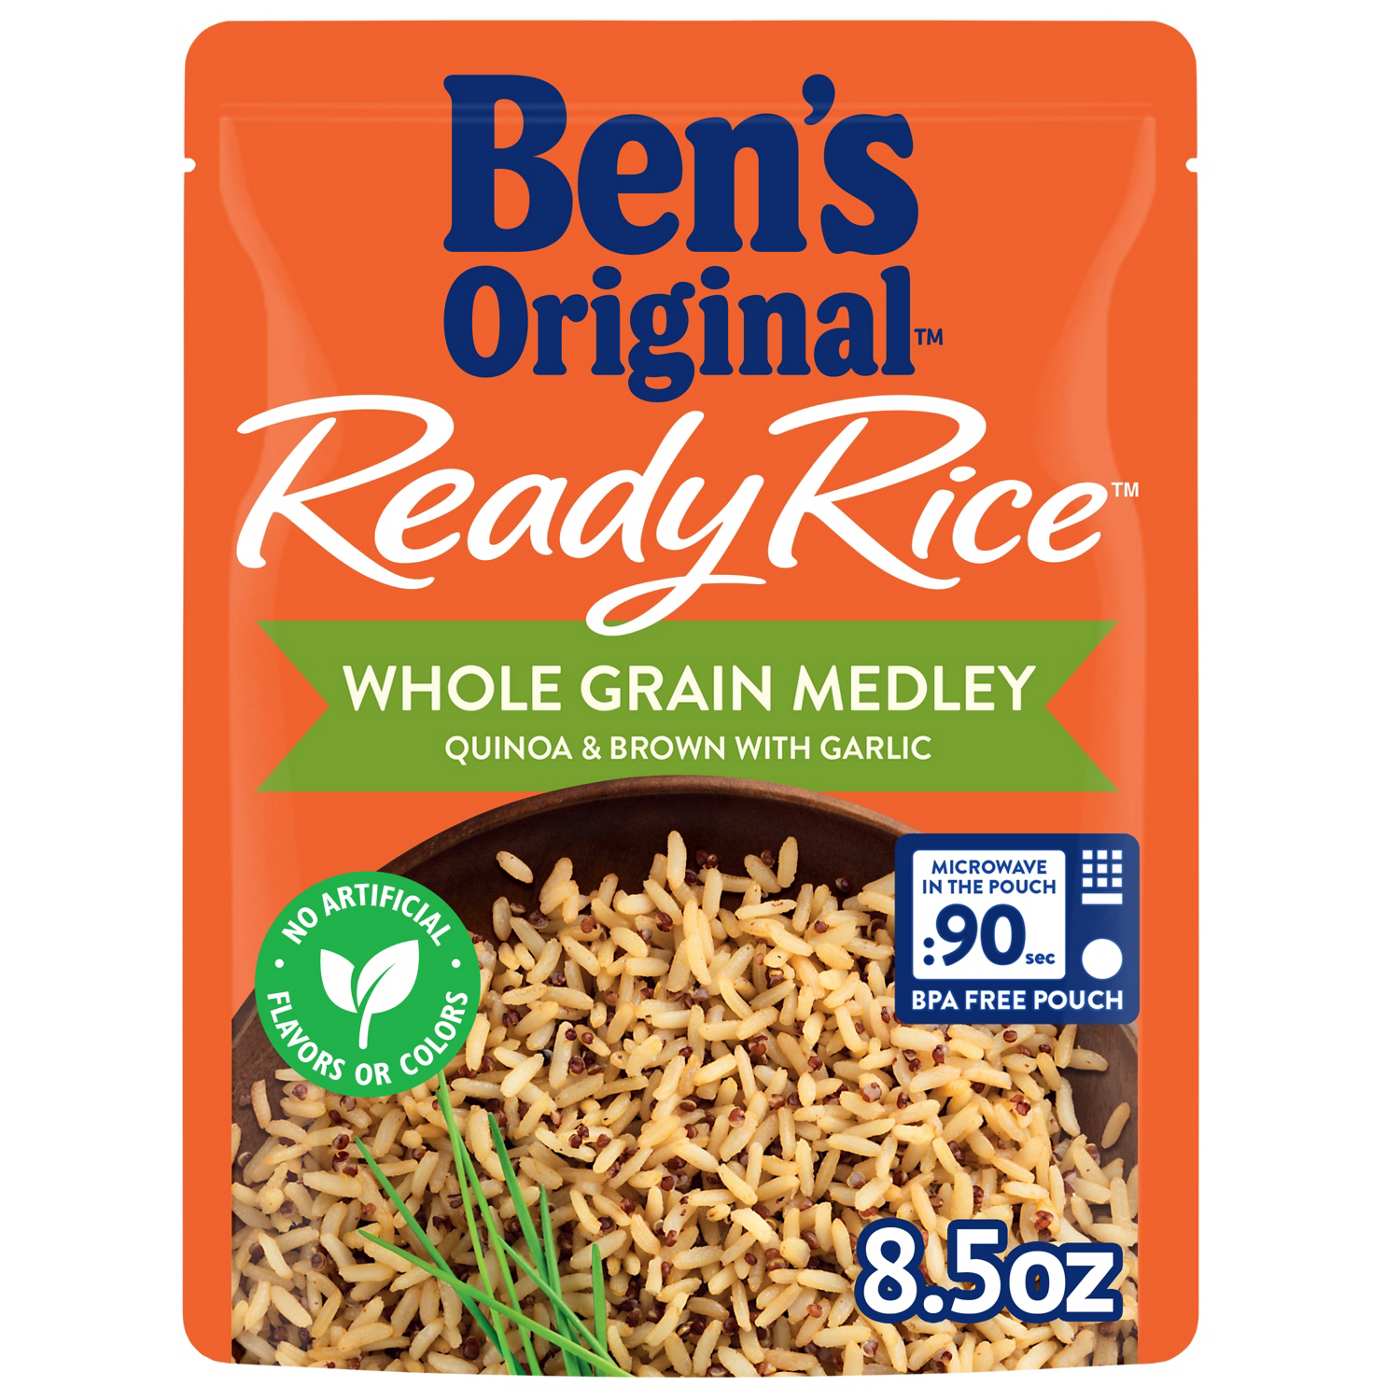 Ben's Original Ready Rice Whole Grain Medley Quinoa and Brown Flavored Rice; image 1 of 2